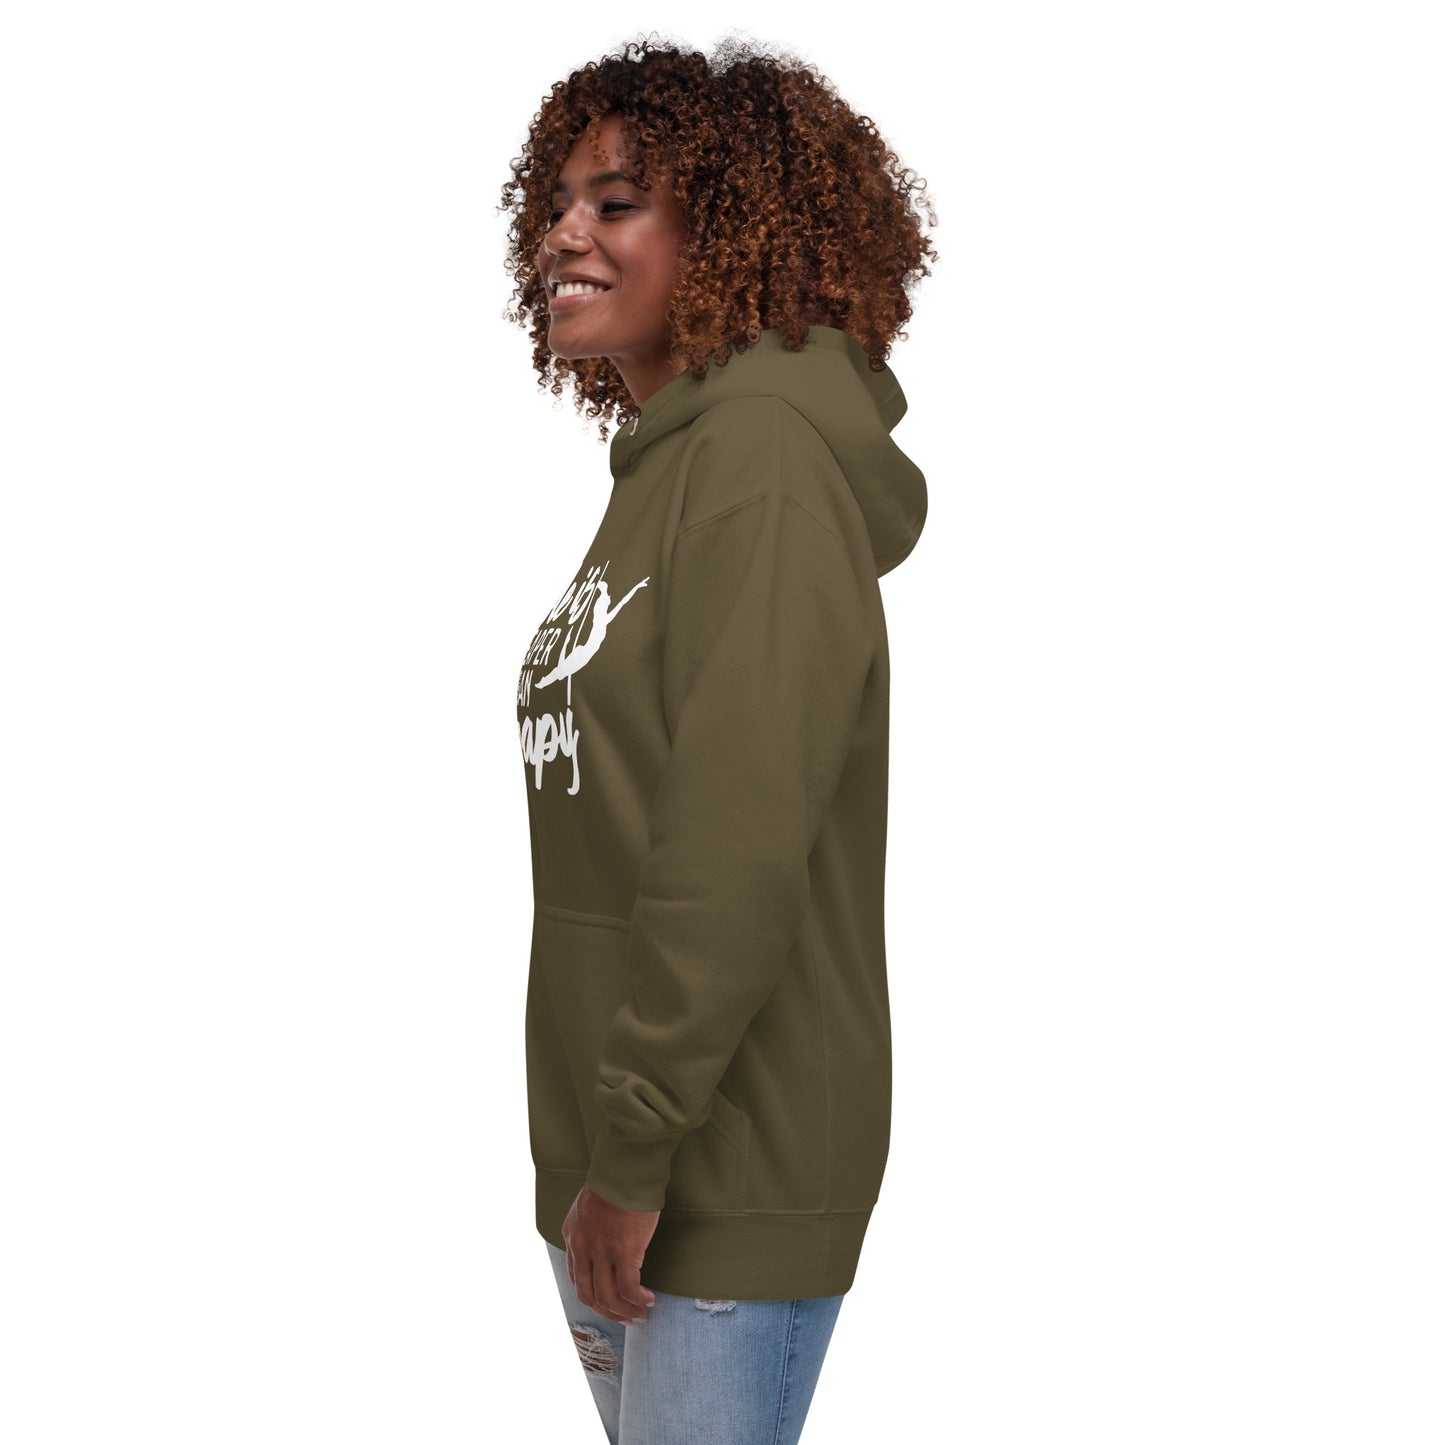 Pole Is Cheaper Than Therapy - Unisex Hoodie